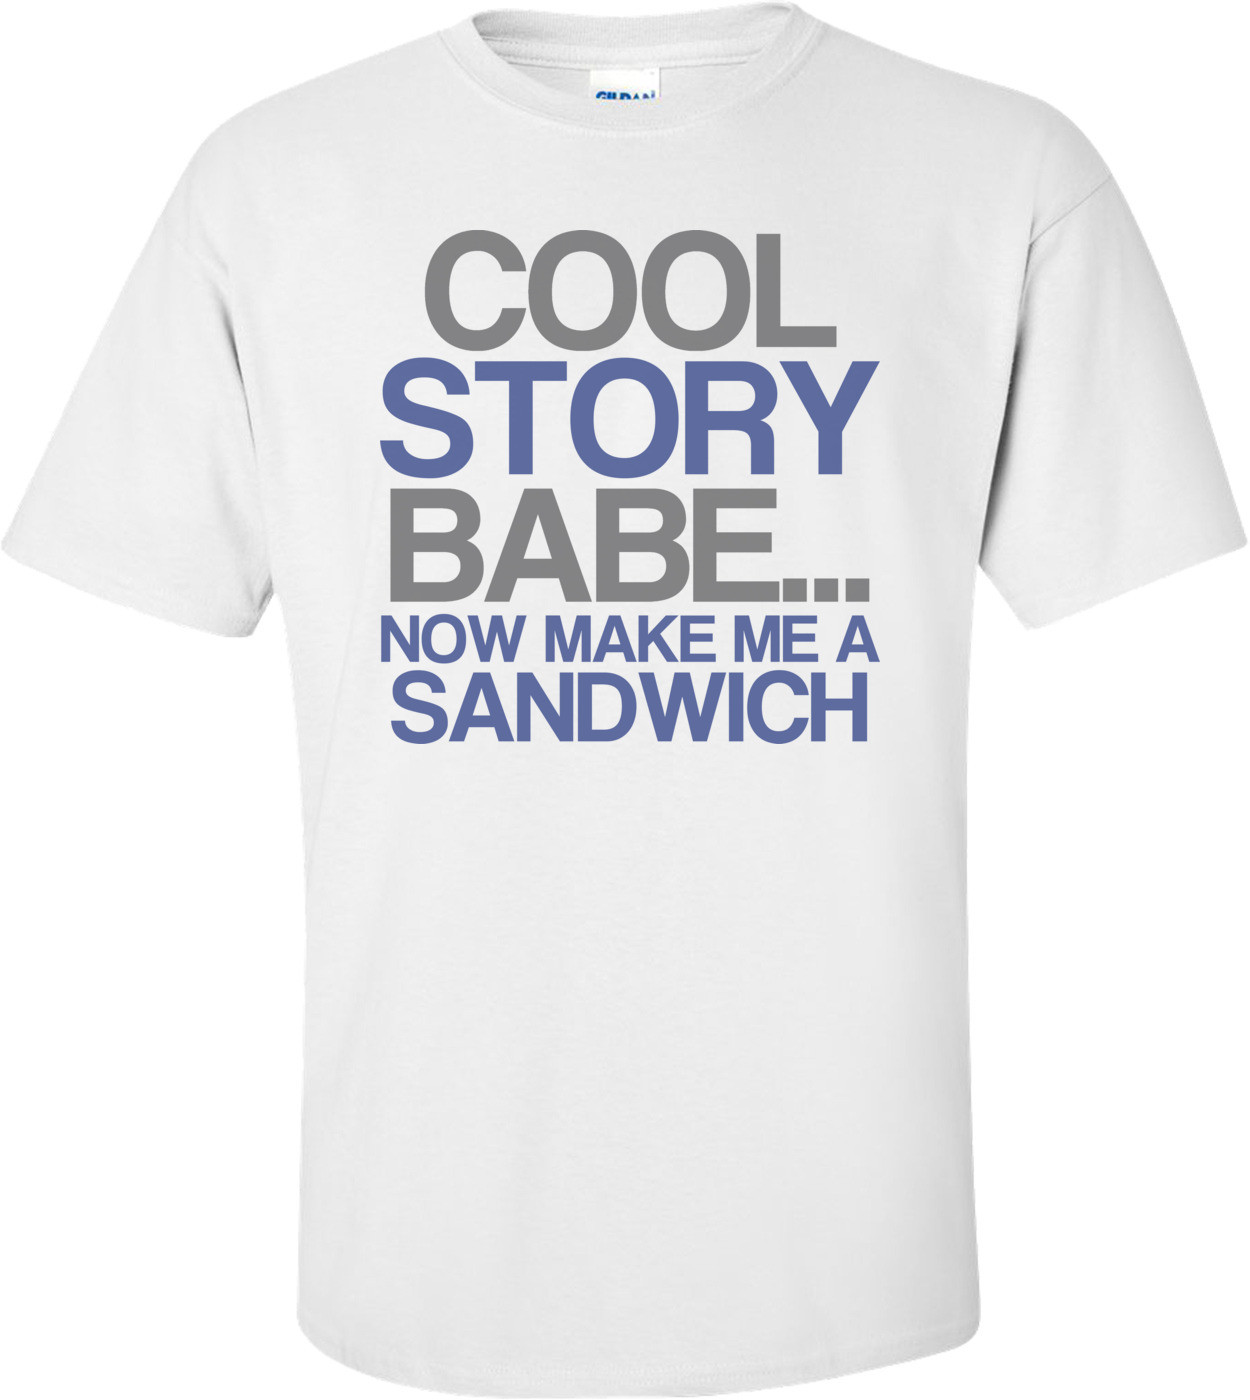 Cool Story Baby... Now Make Me A Sandwich Funny Shirt